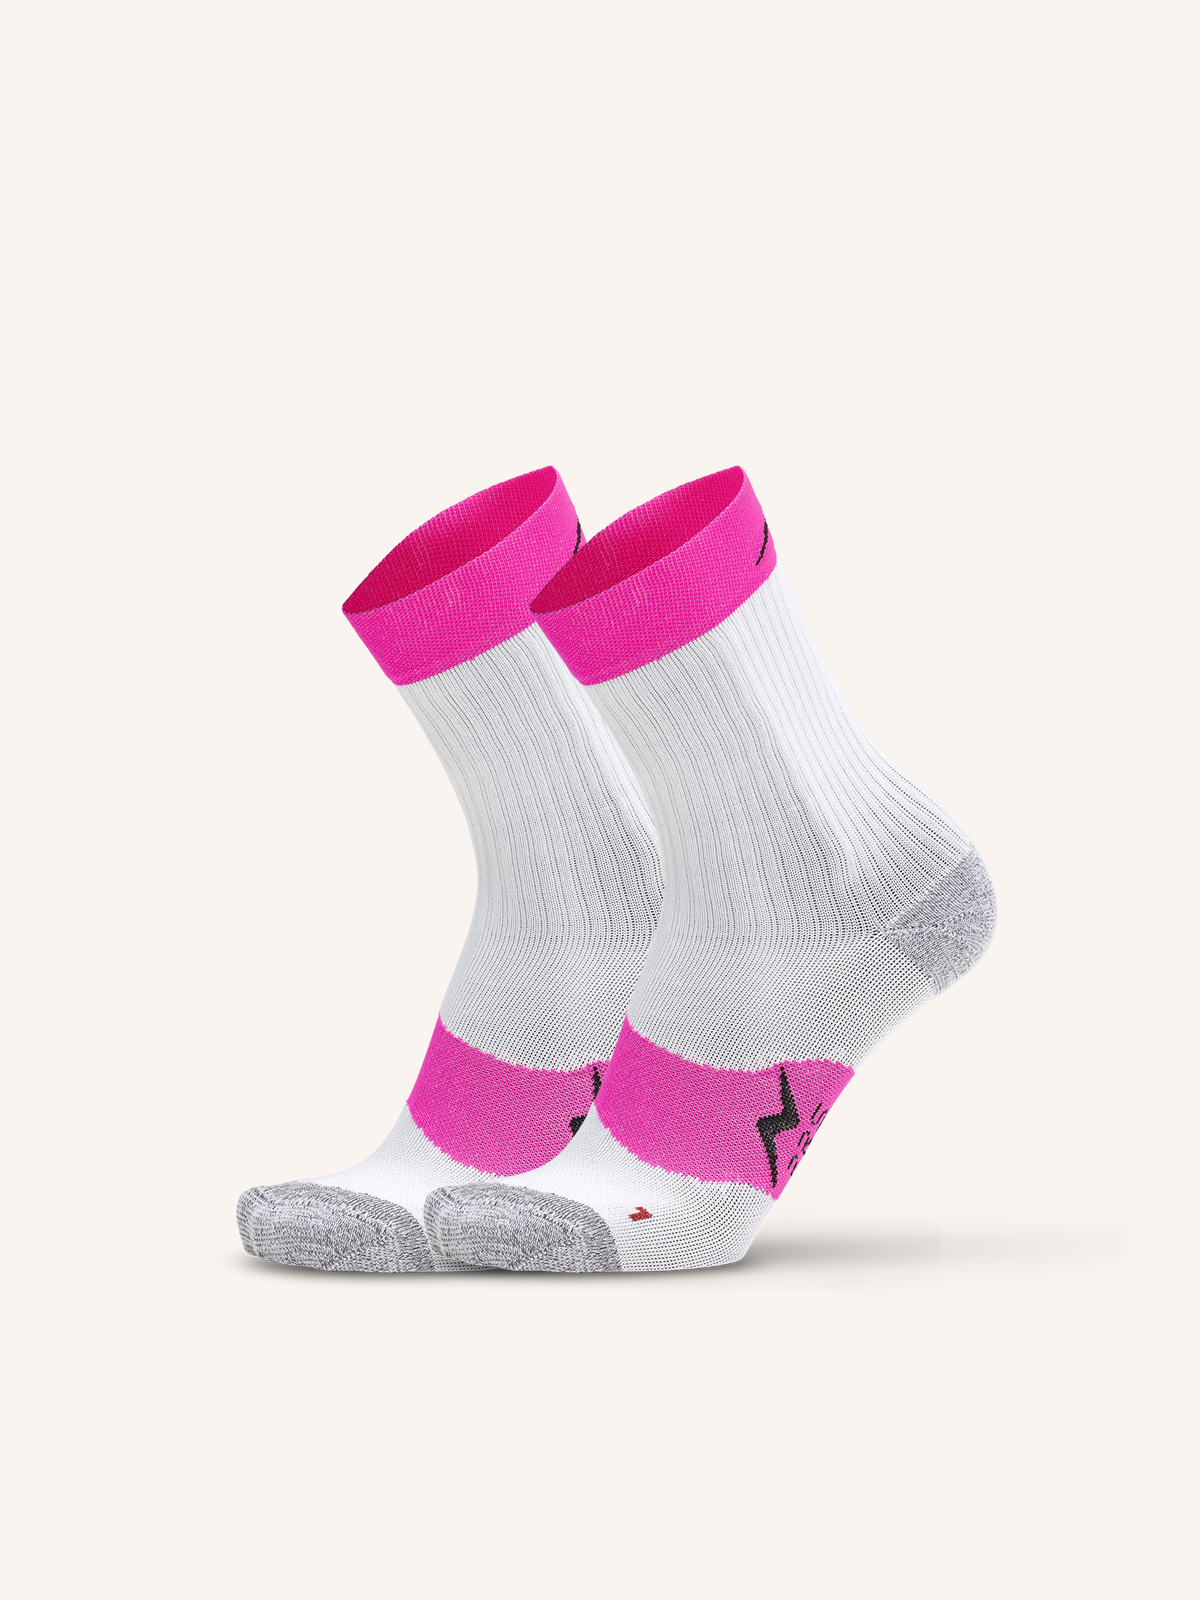 Bike sock in Dryarn for women by bike | Plain Color | Pack of 2 Pairs | PRS PRO 02D